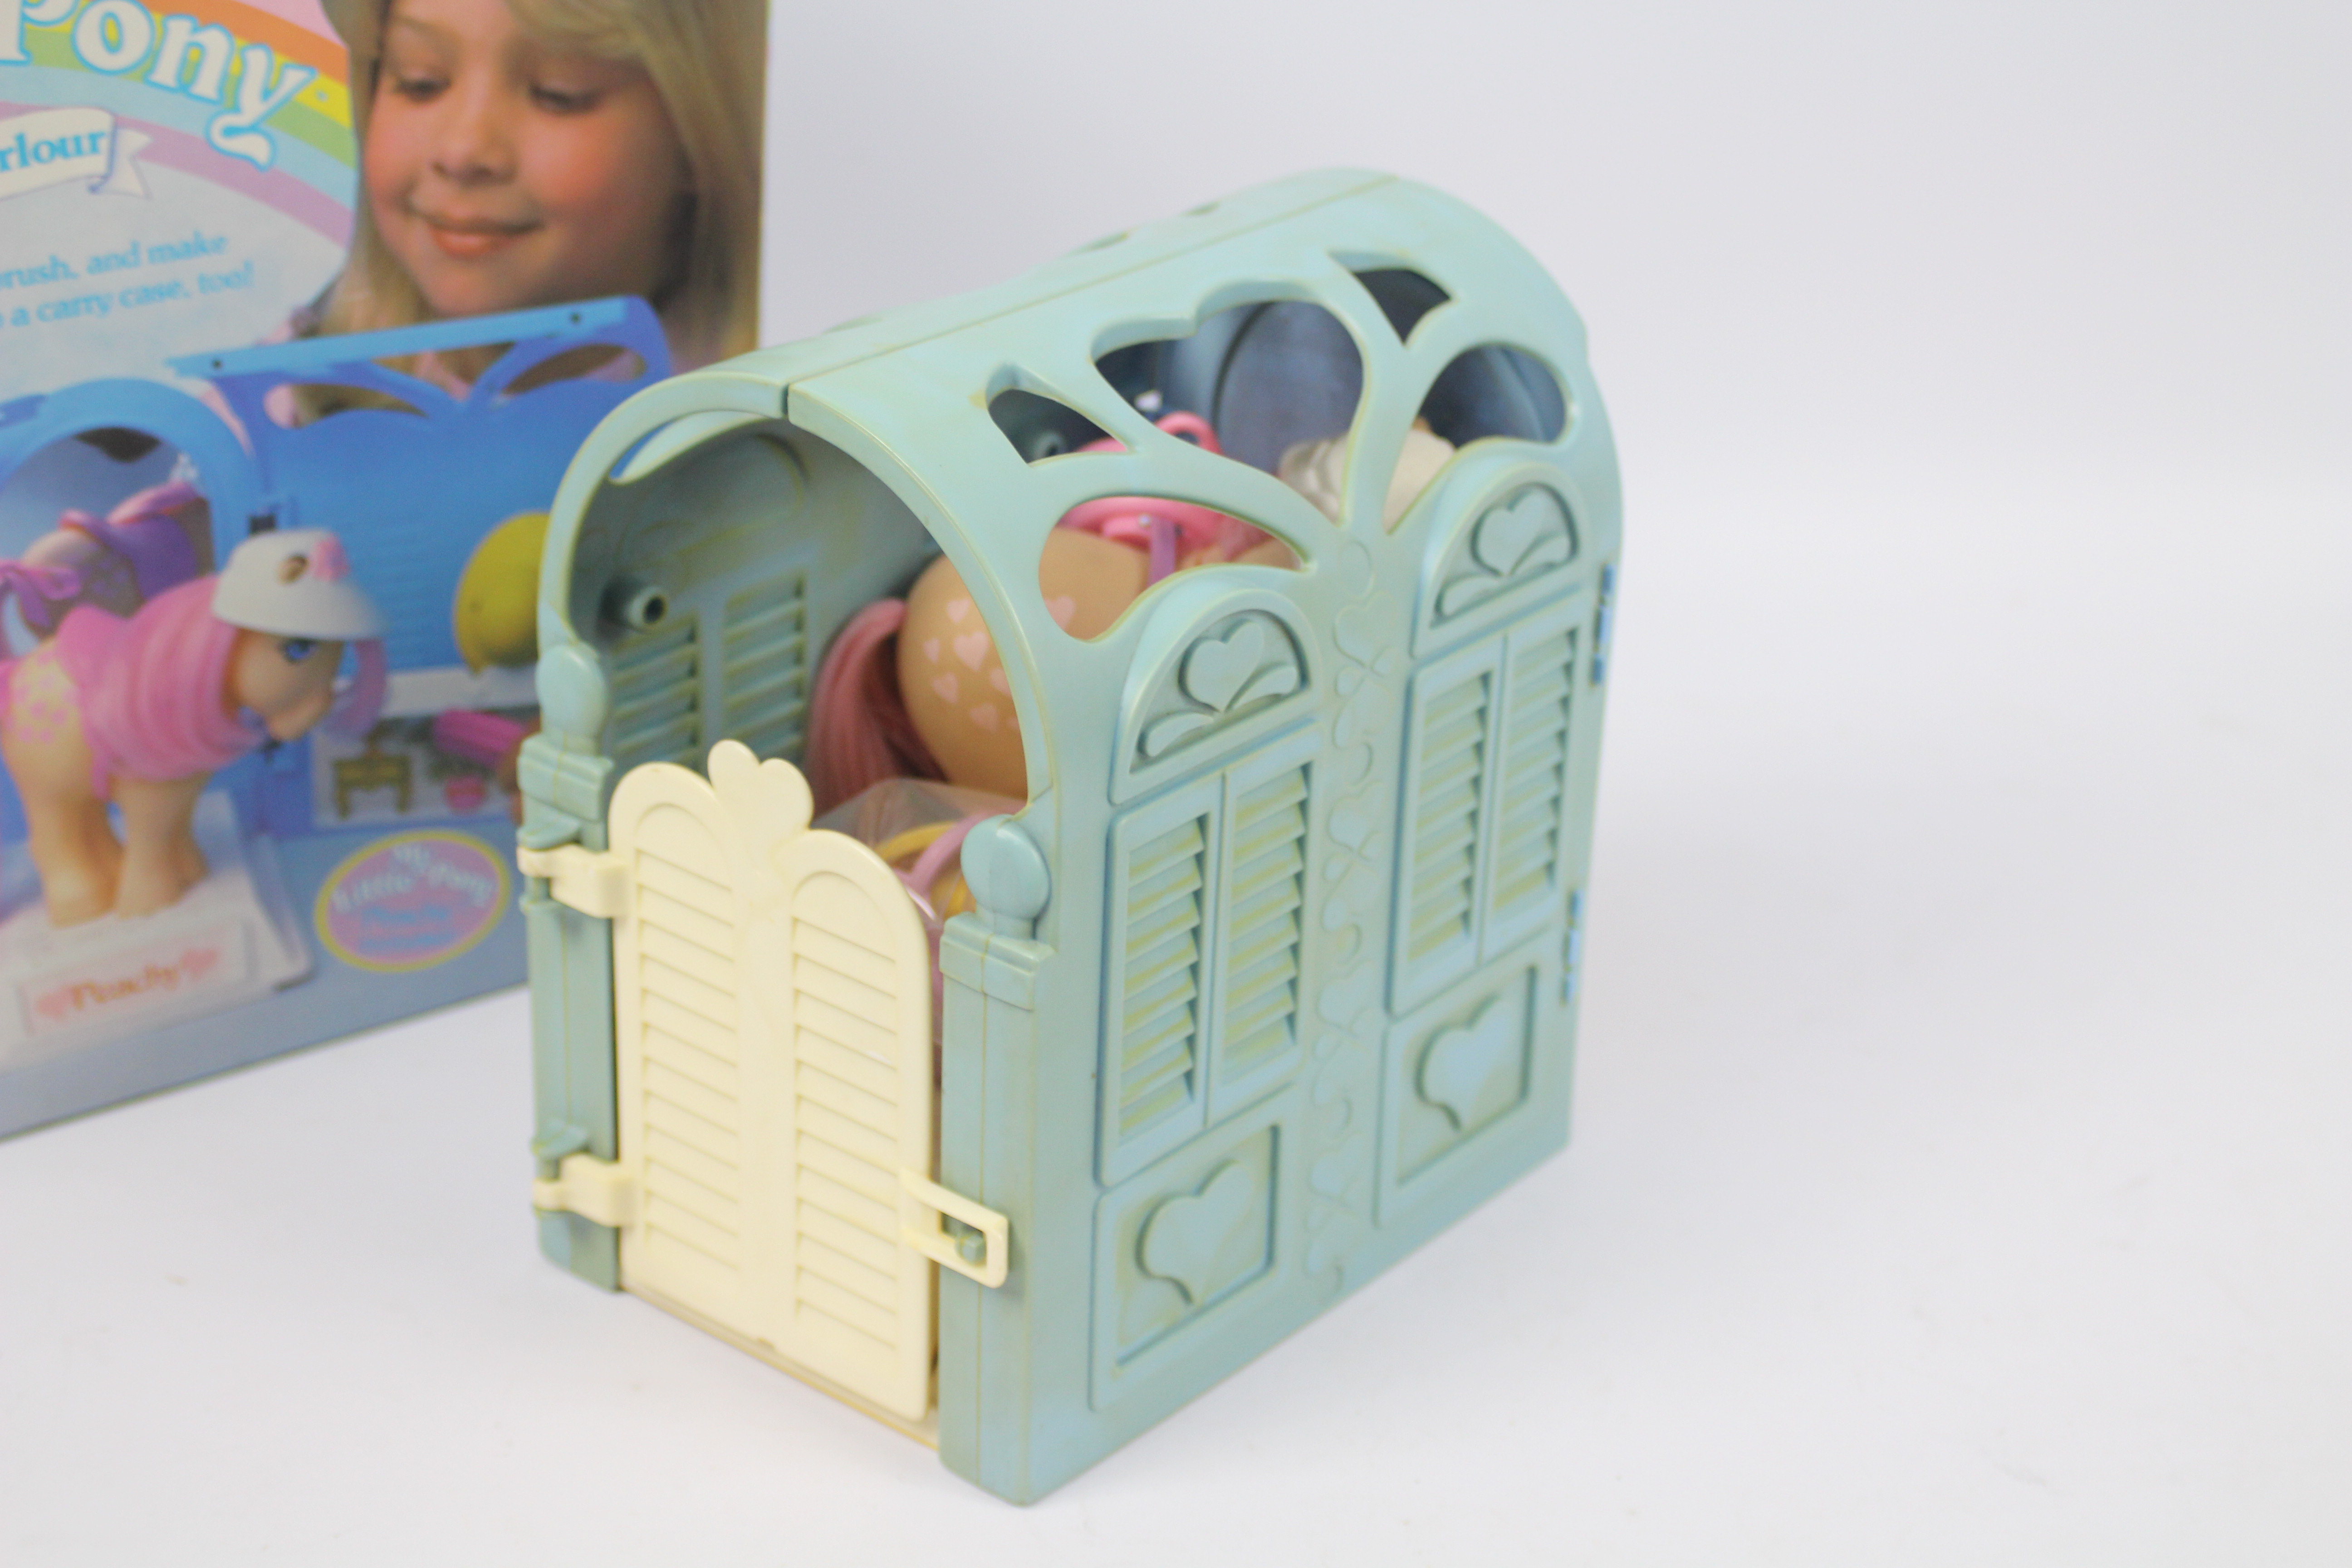 My Little Pony, Grooming Parlour -Carry case parlour comes with MLP "Peachy", twinkles the cat, - Image 4 of 5